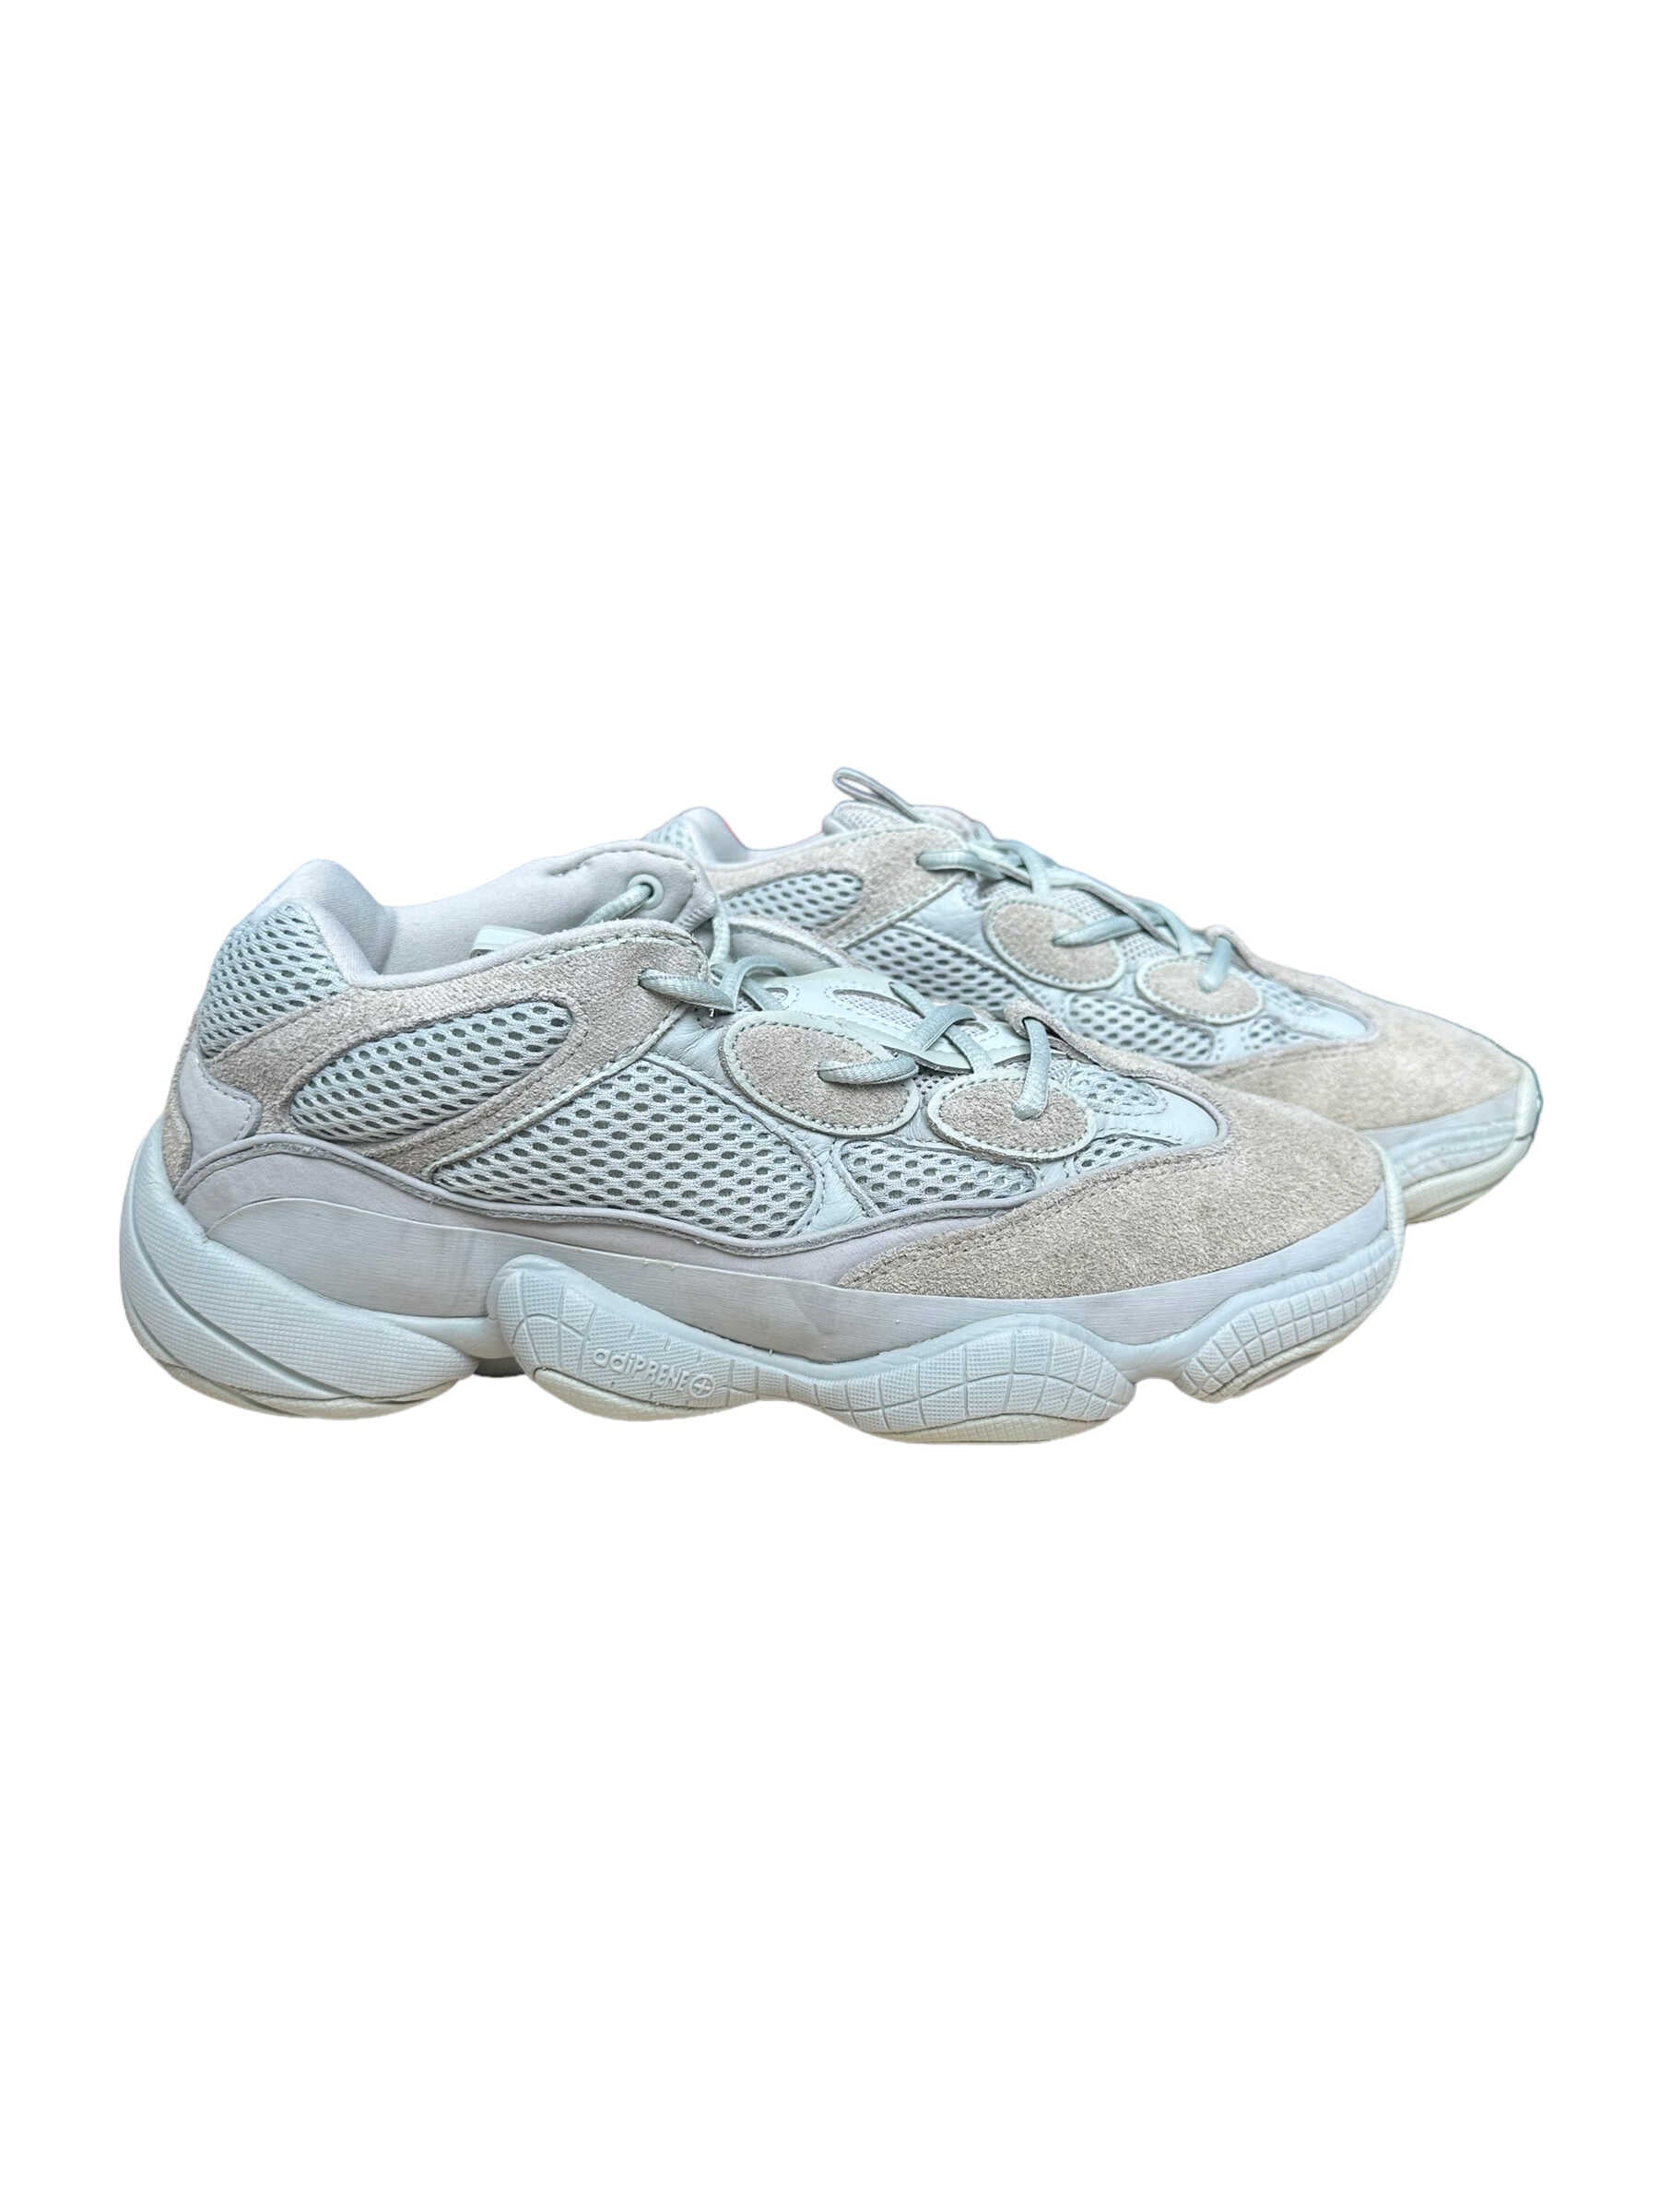 Adidas Yeezy 500 Blush Sneakers — Genuine Design luxury consignment Calgary, Alberta, New & pre-owned clothing, shoes, accessories.